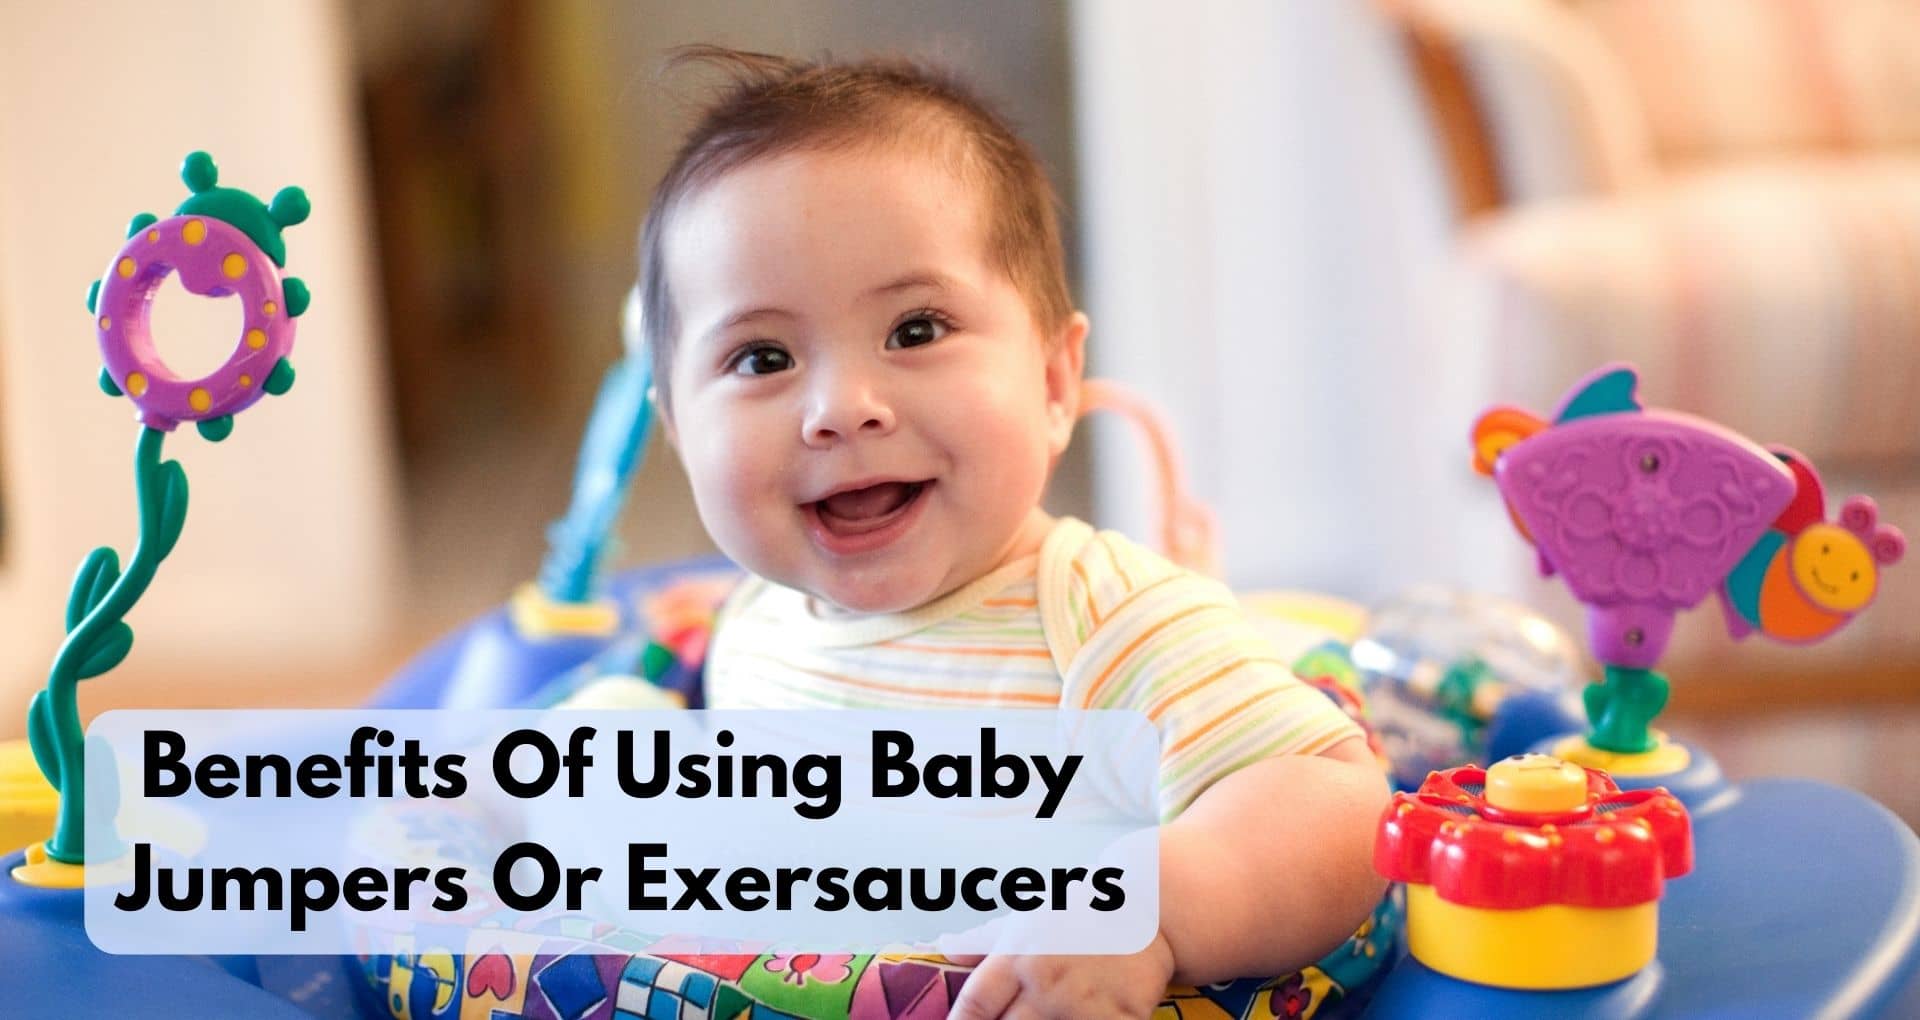 What Are The Benefits Of Using Baby Jumper?